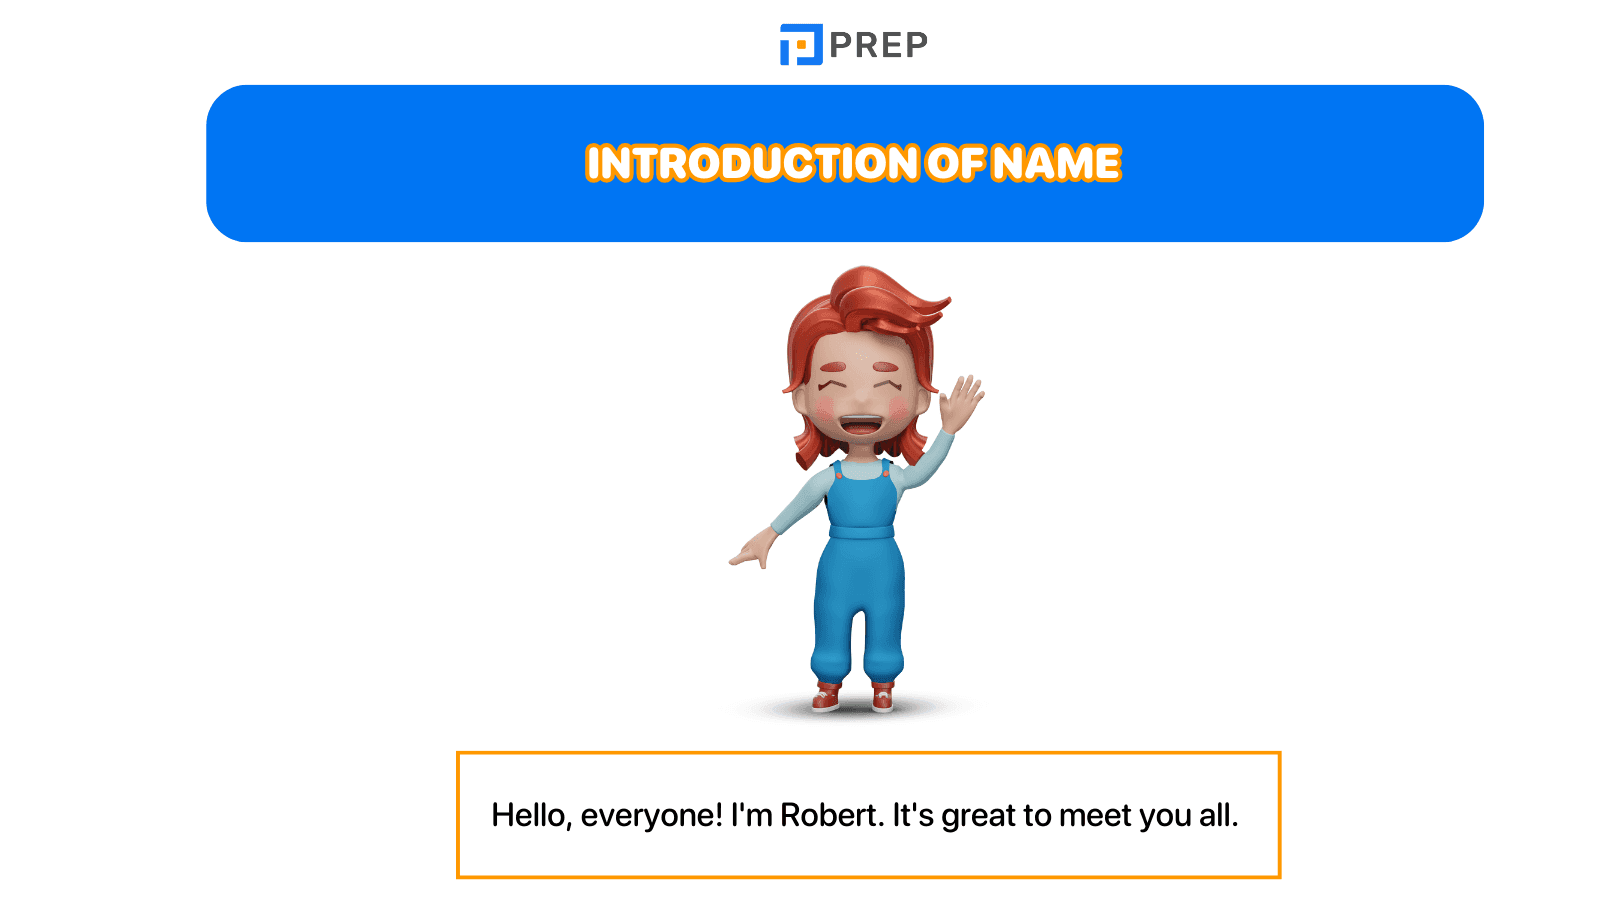 Introduction of name